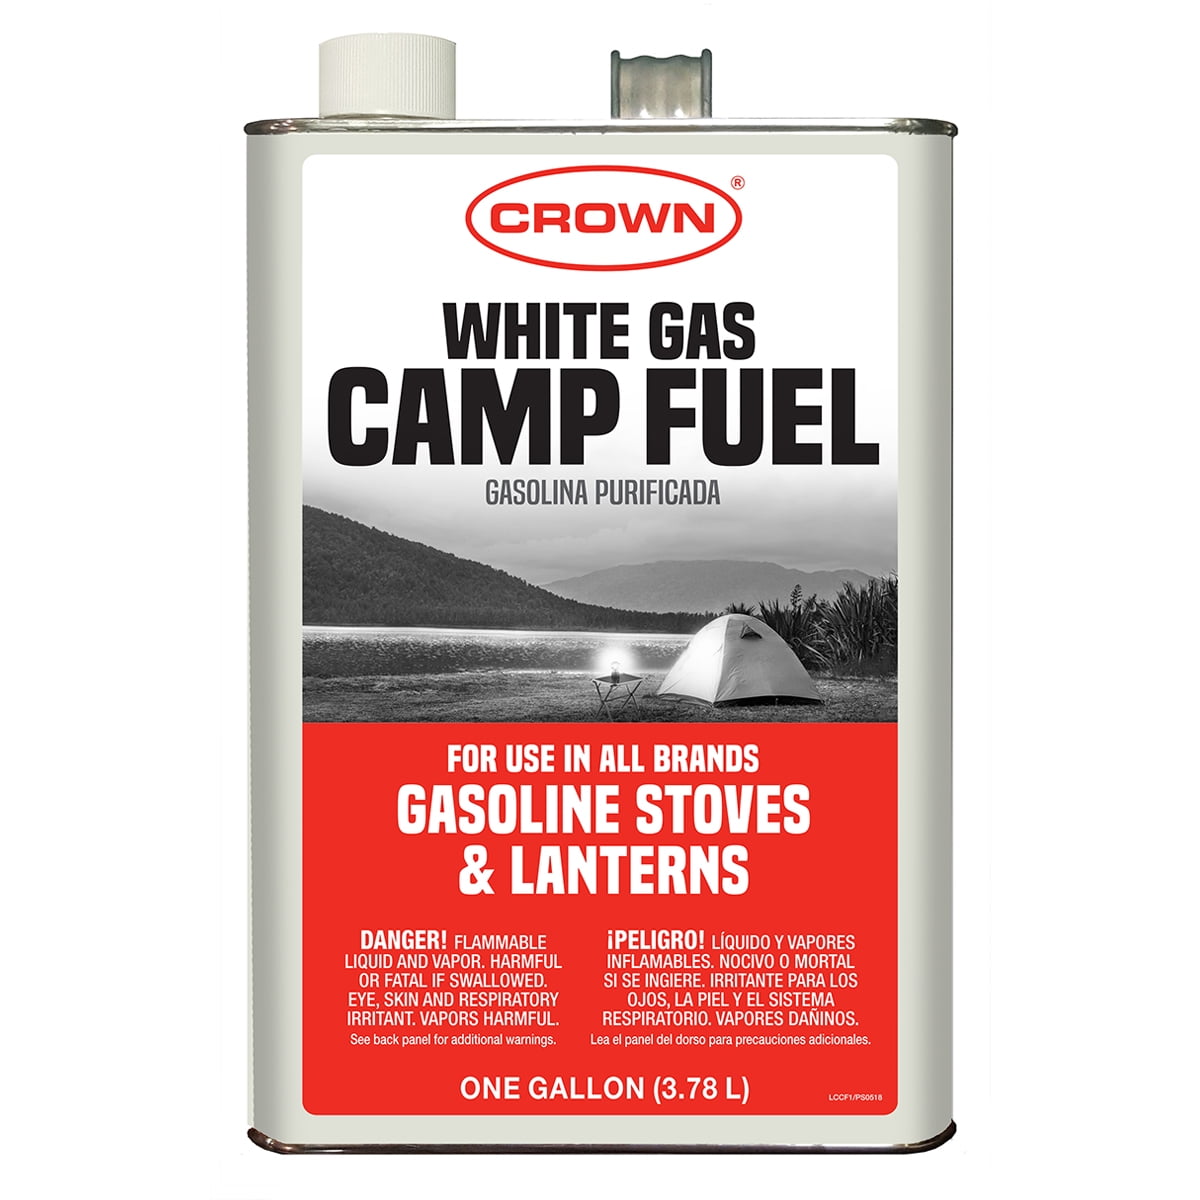 Crown White Gas Camp Fuel for Use in Gasoline Stoves and Lanterns, 1 Gallon